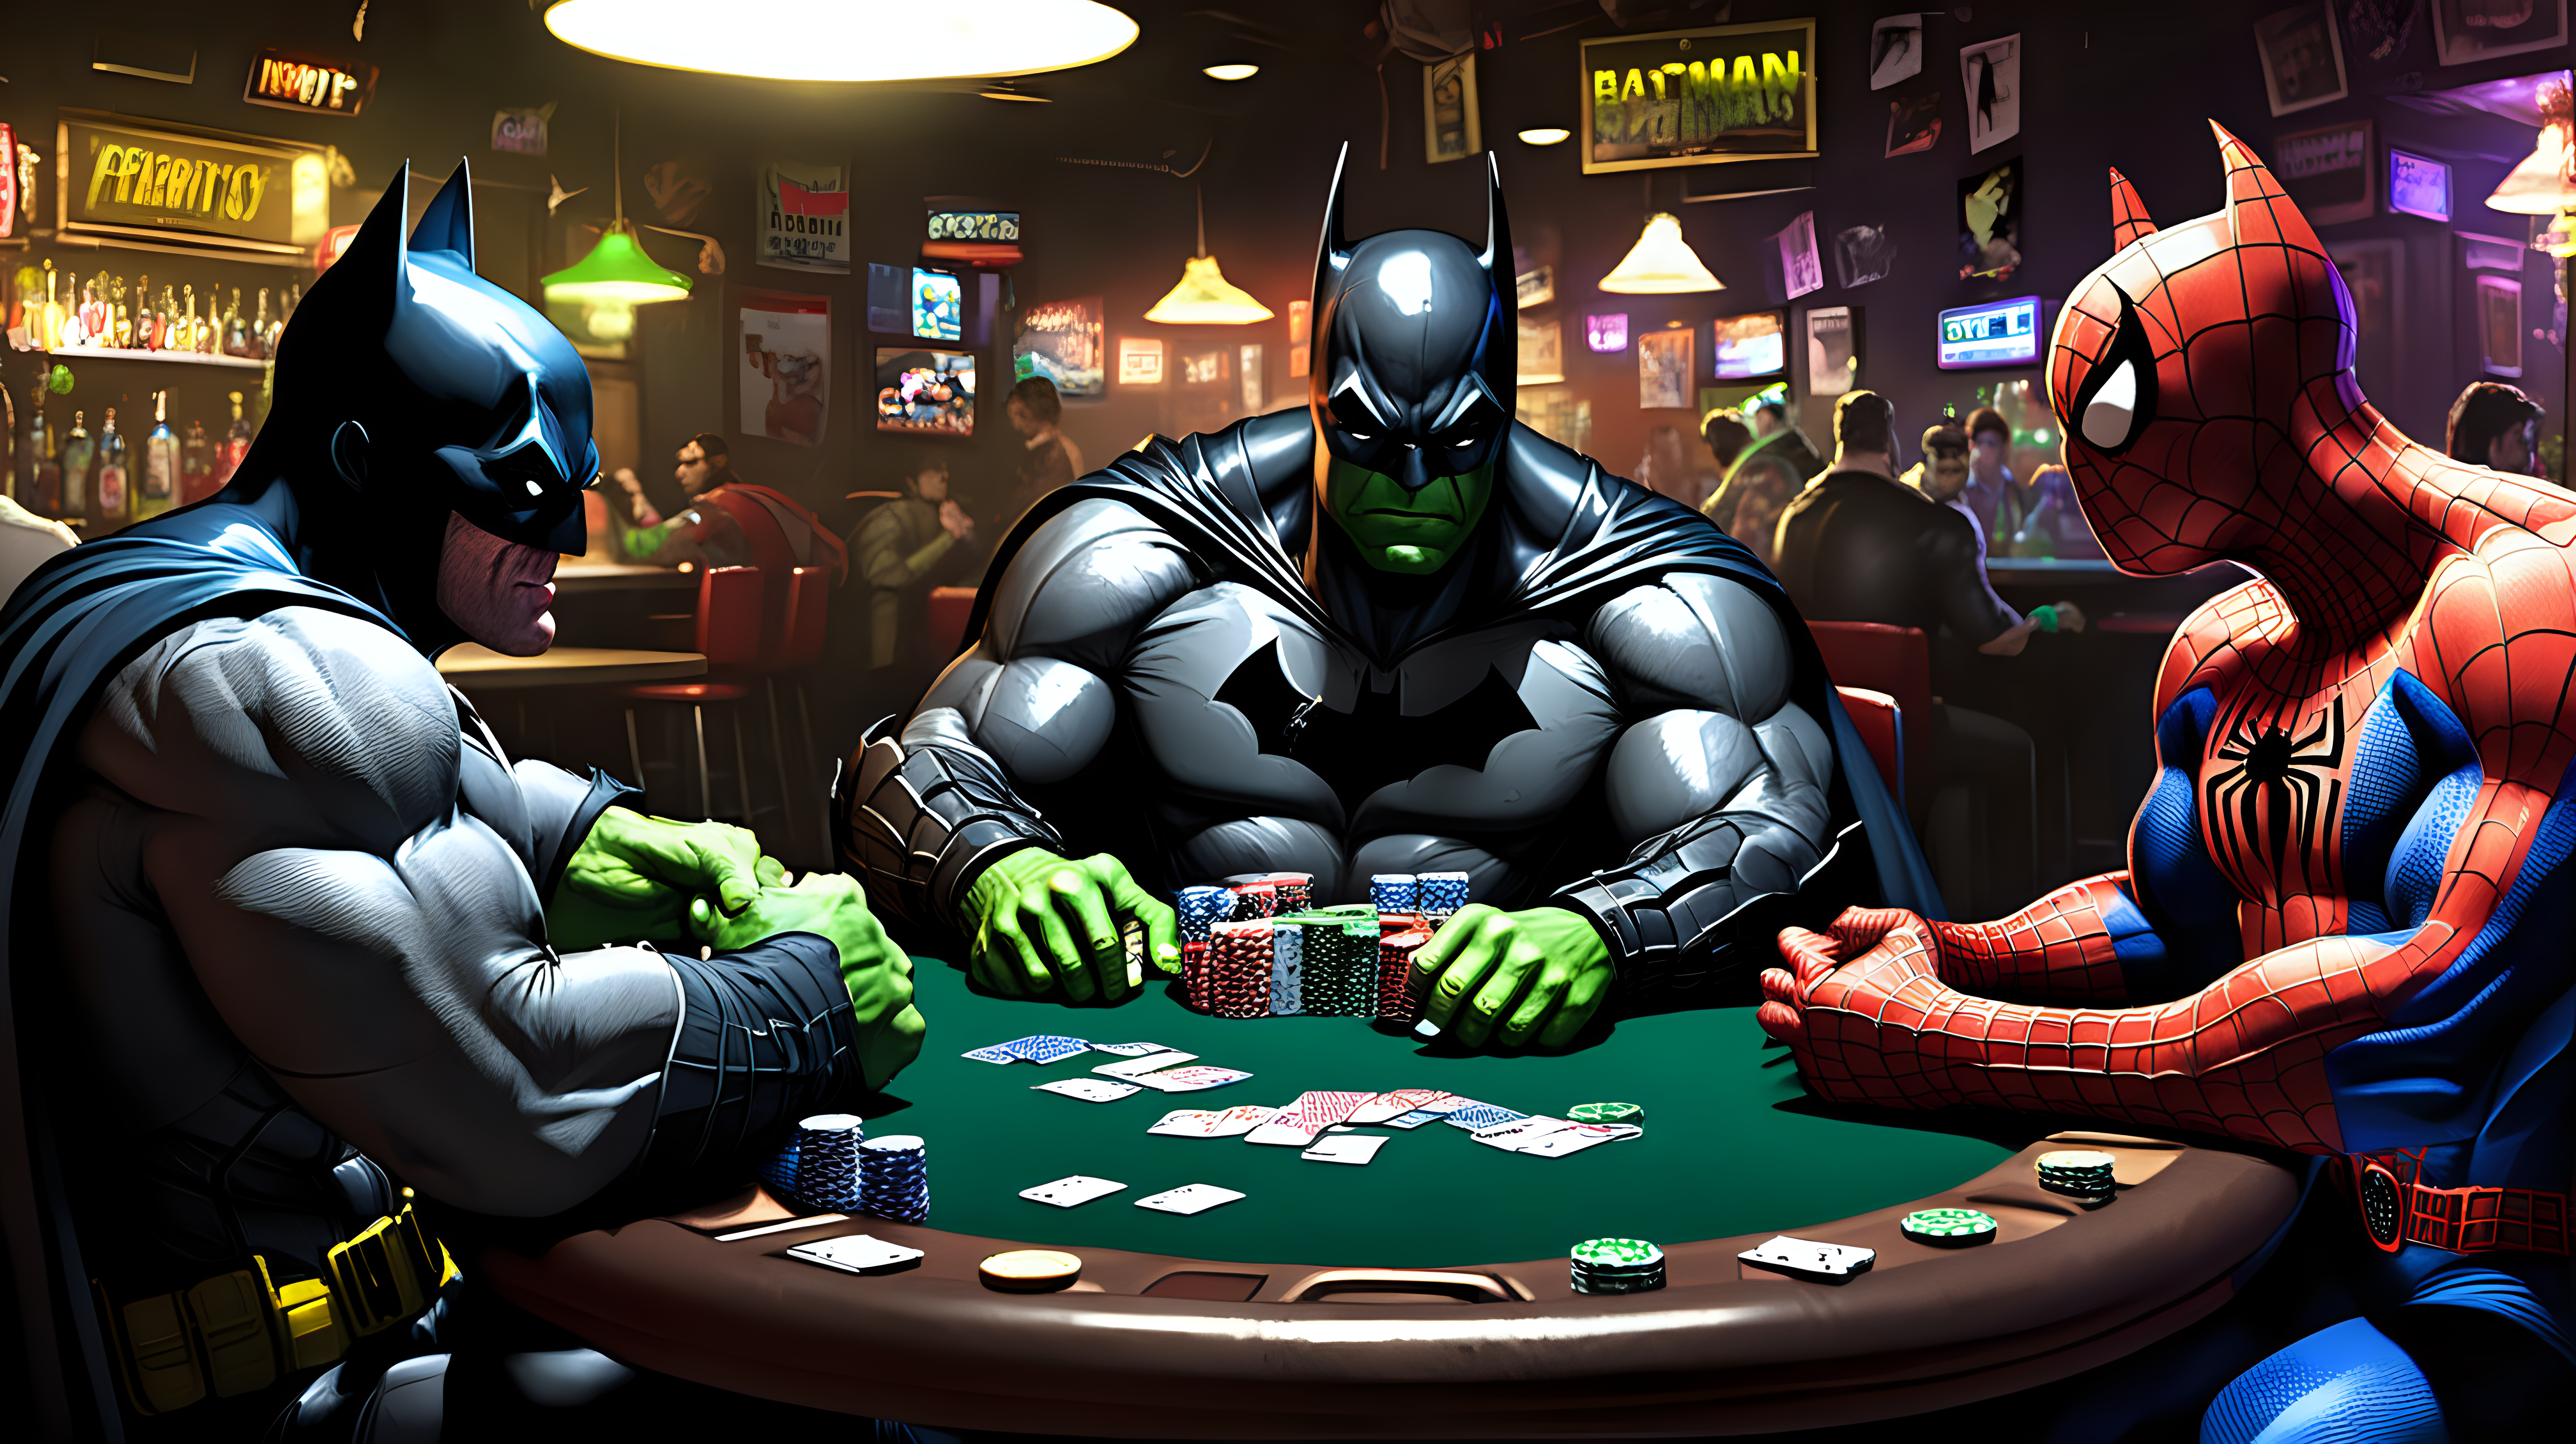 The Batman and Spiderman and Hulk playing poker and having drinks in a dive bar